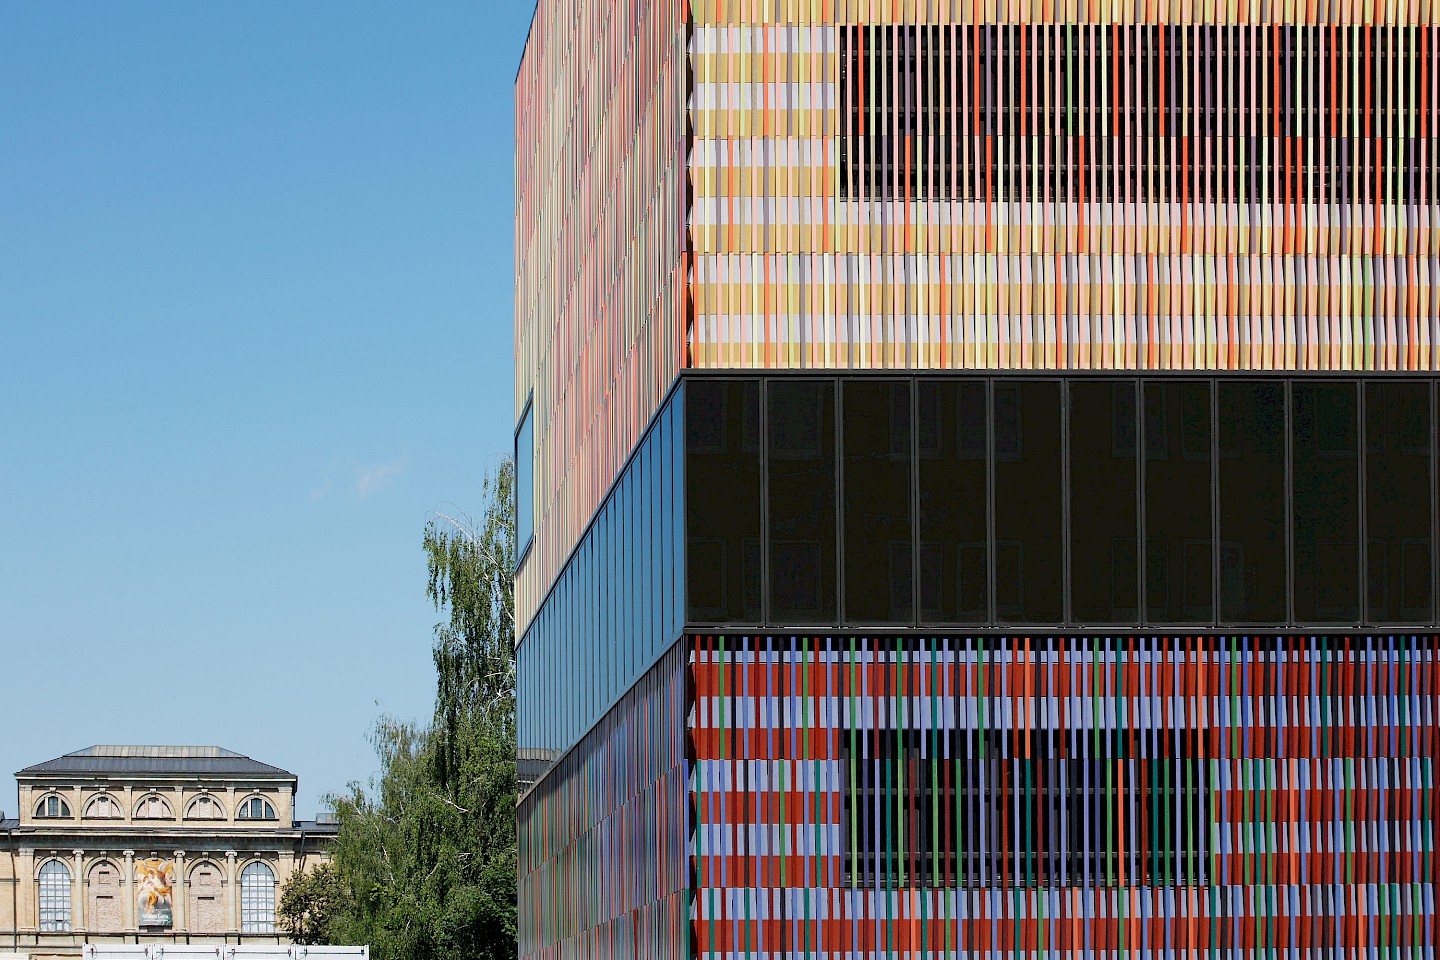 Exterior shot of Museum Brandhorst with colorful facade